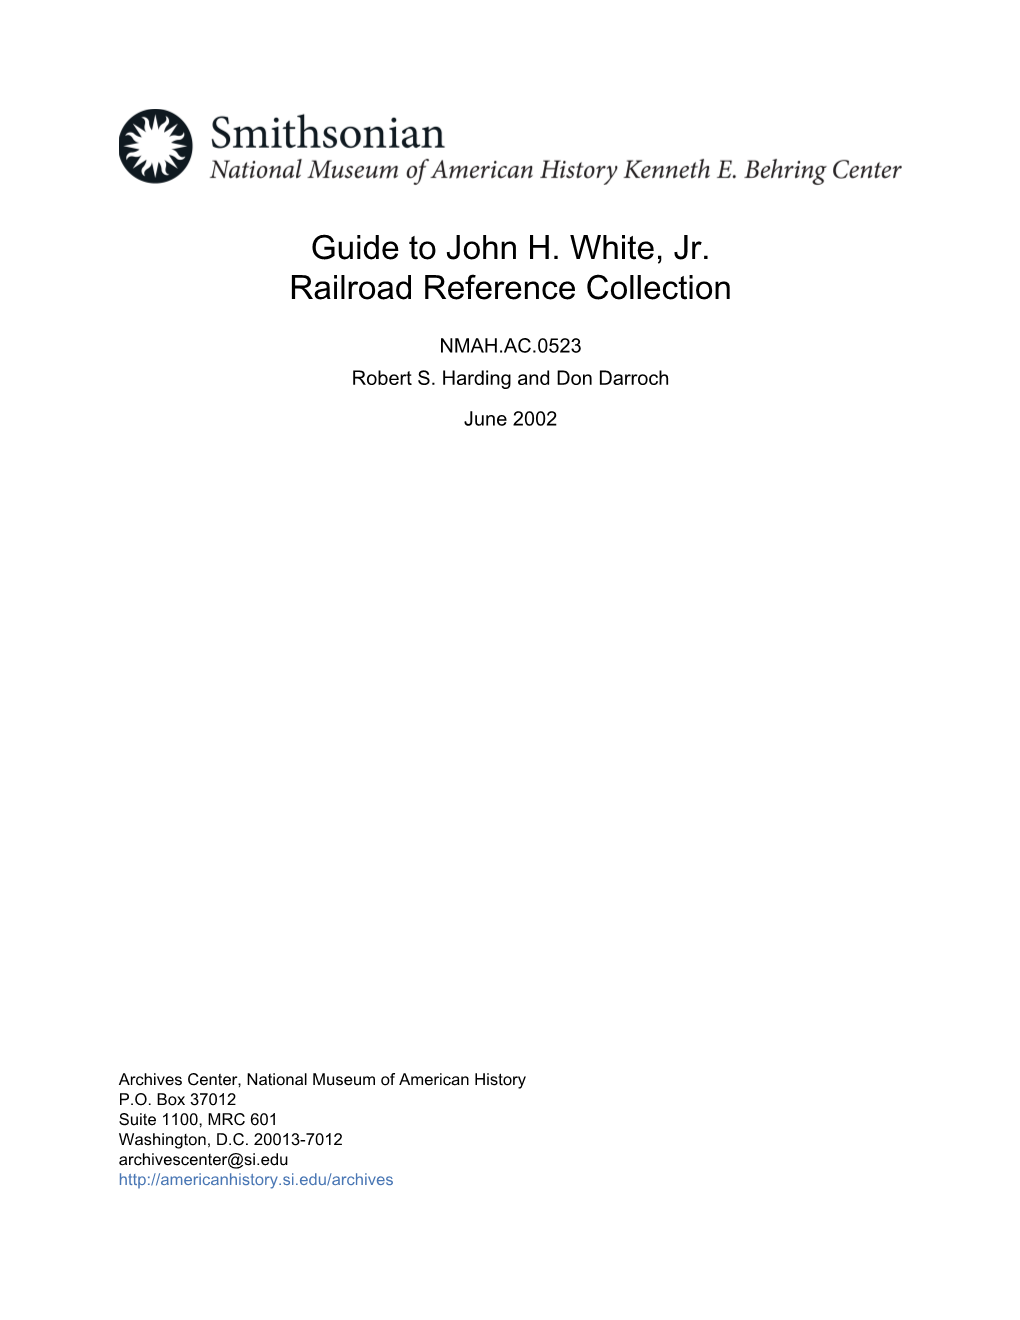 Guide to John H. White, Jr. Railroad Reference Collection